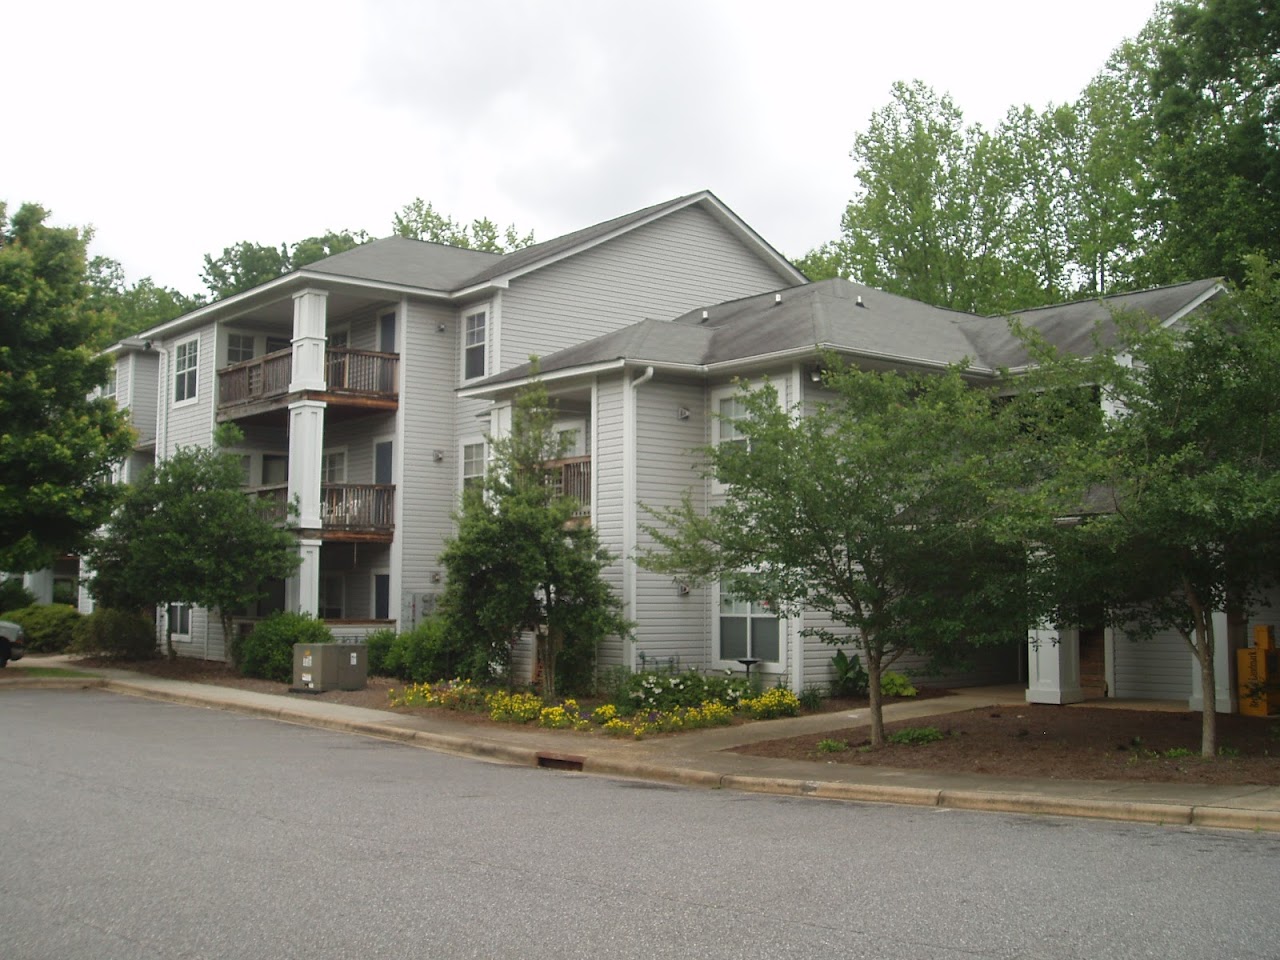 Photo of FOREST PARK GARDENS PHASE II. Affordable housing located at 1305 FOREST PARK TERRACE STATESVILLE, NC 28677